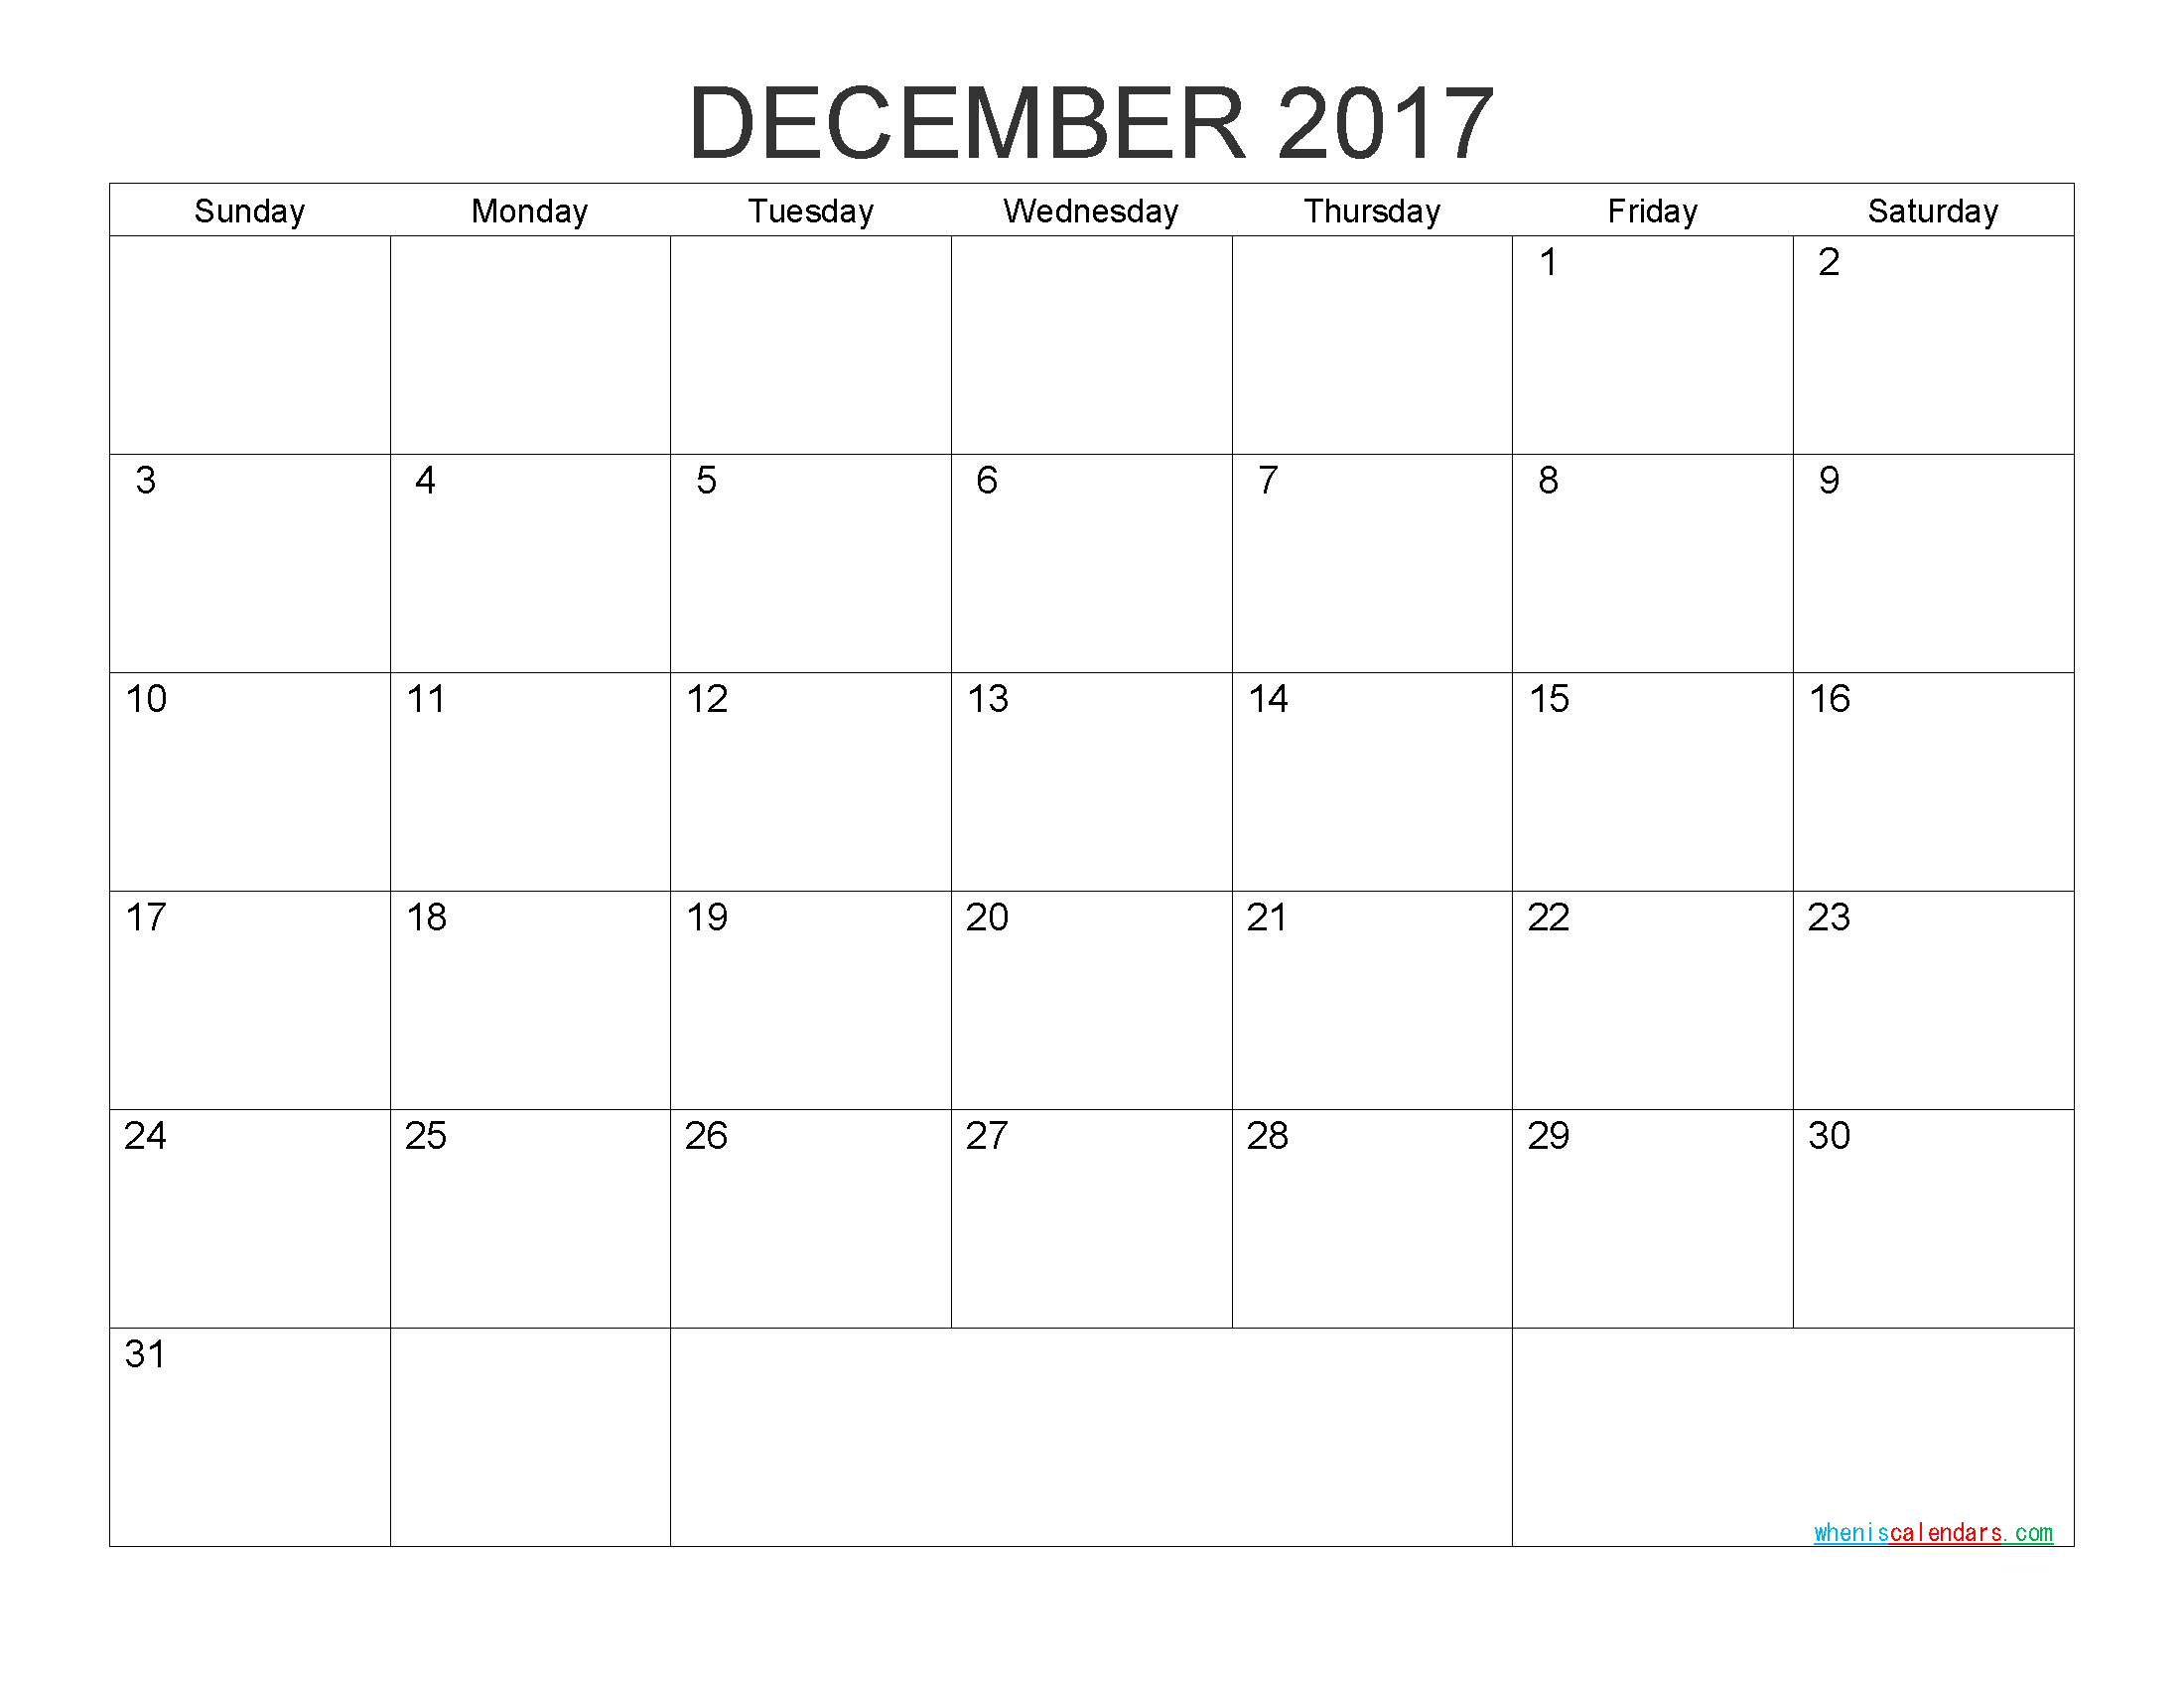 december-2017-calendar-templates-for-word-excel-and-pdf